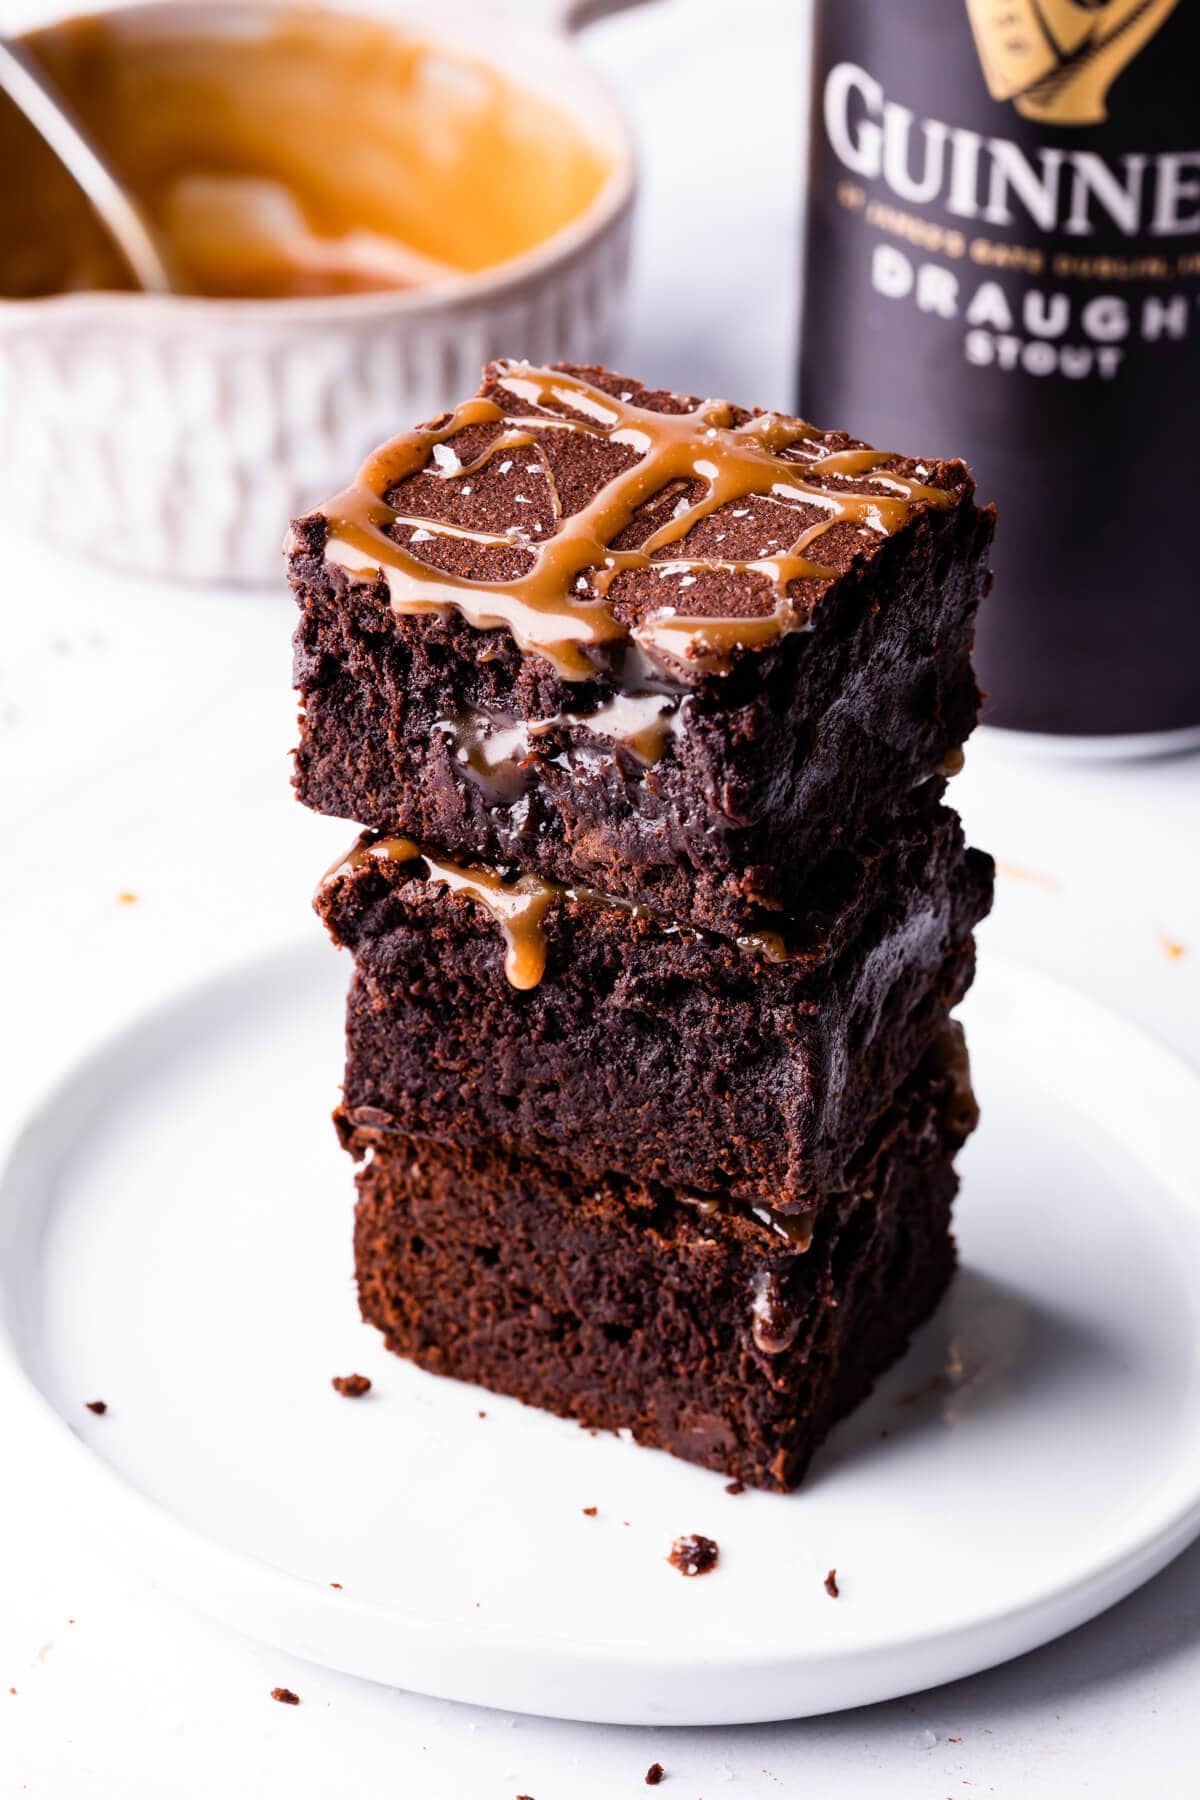 stack of Guinness brownies on a white dessert plate with can of Guinness behind it.